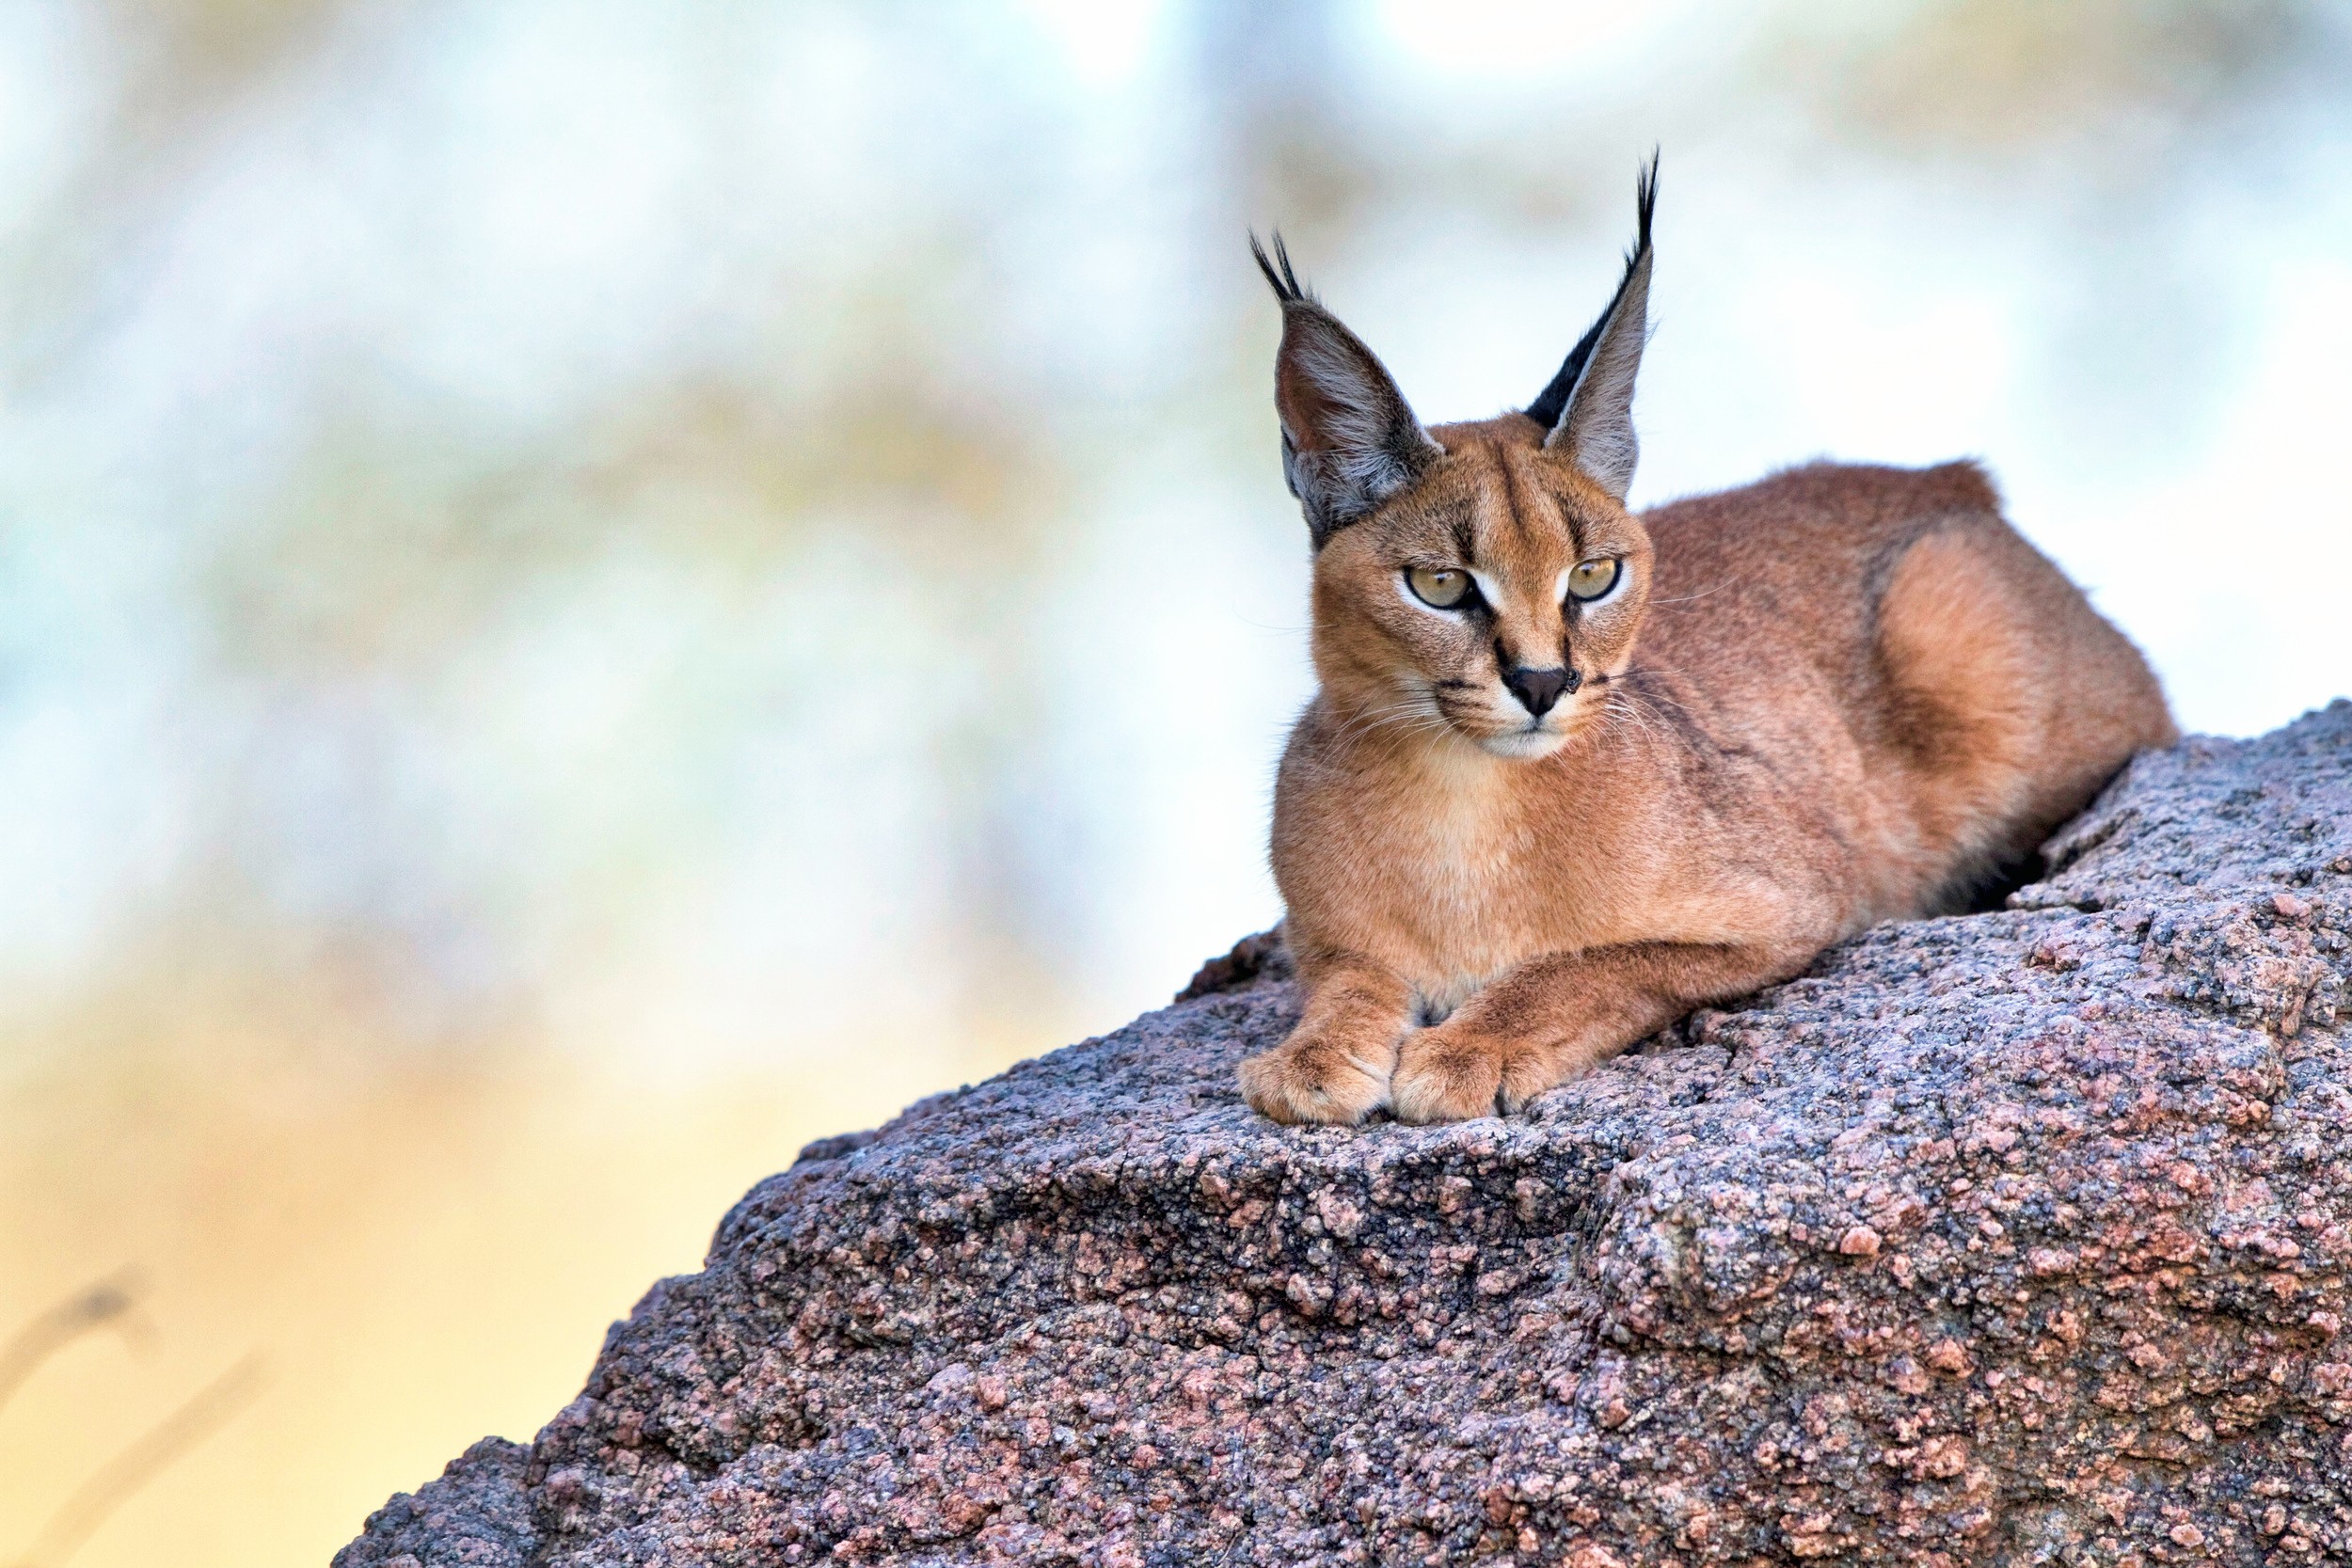 General 2500x1667 animals cats Caracal mammals closeup whiskers nature blurry background